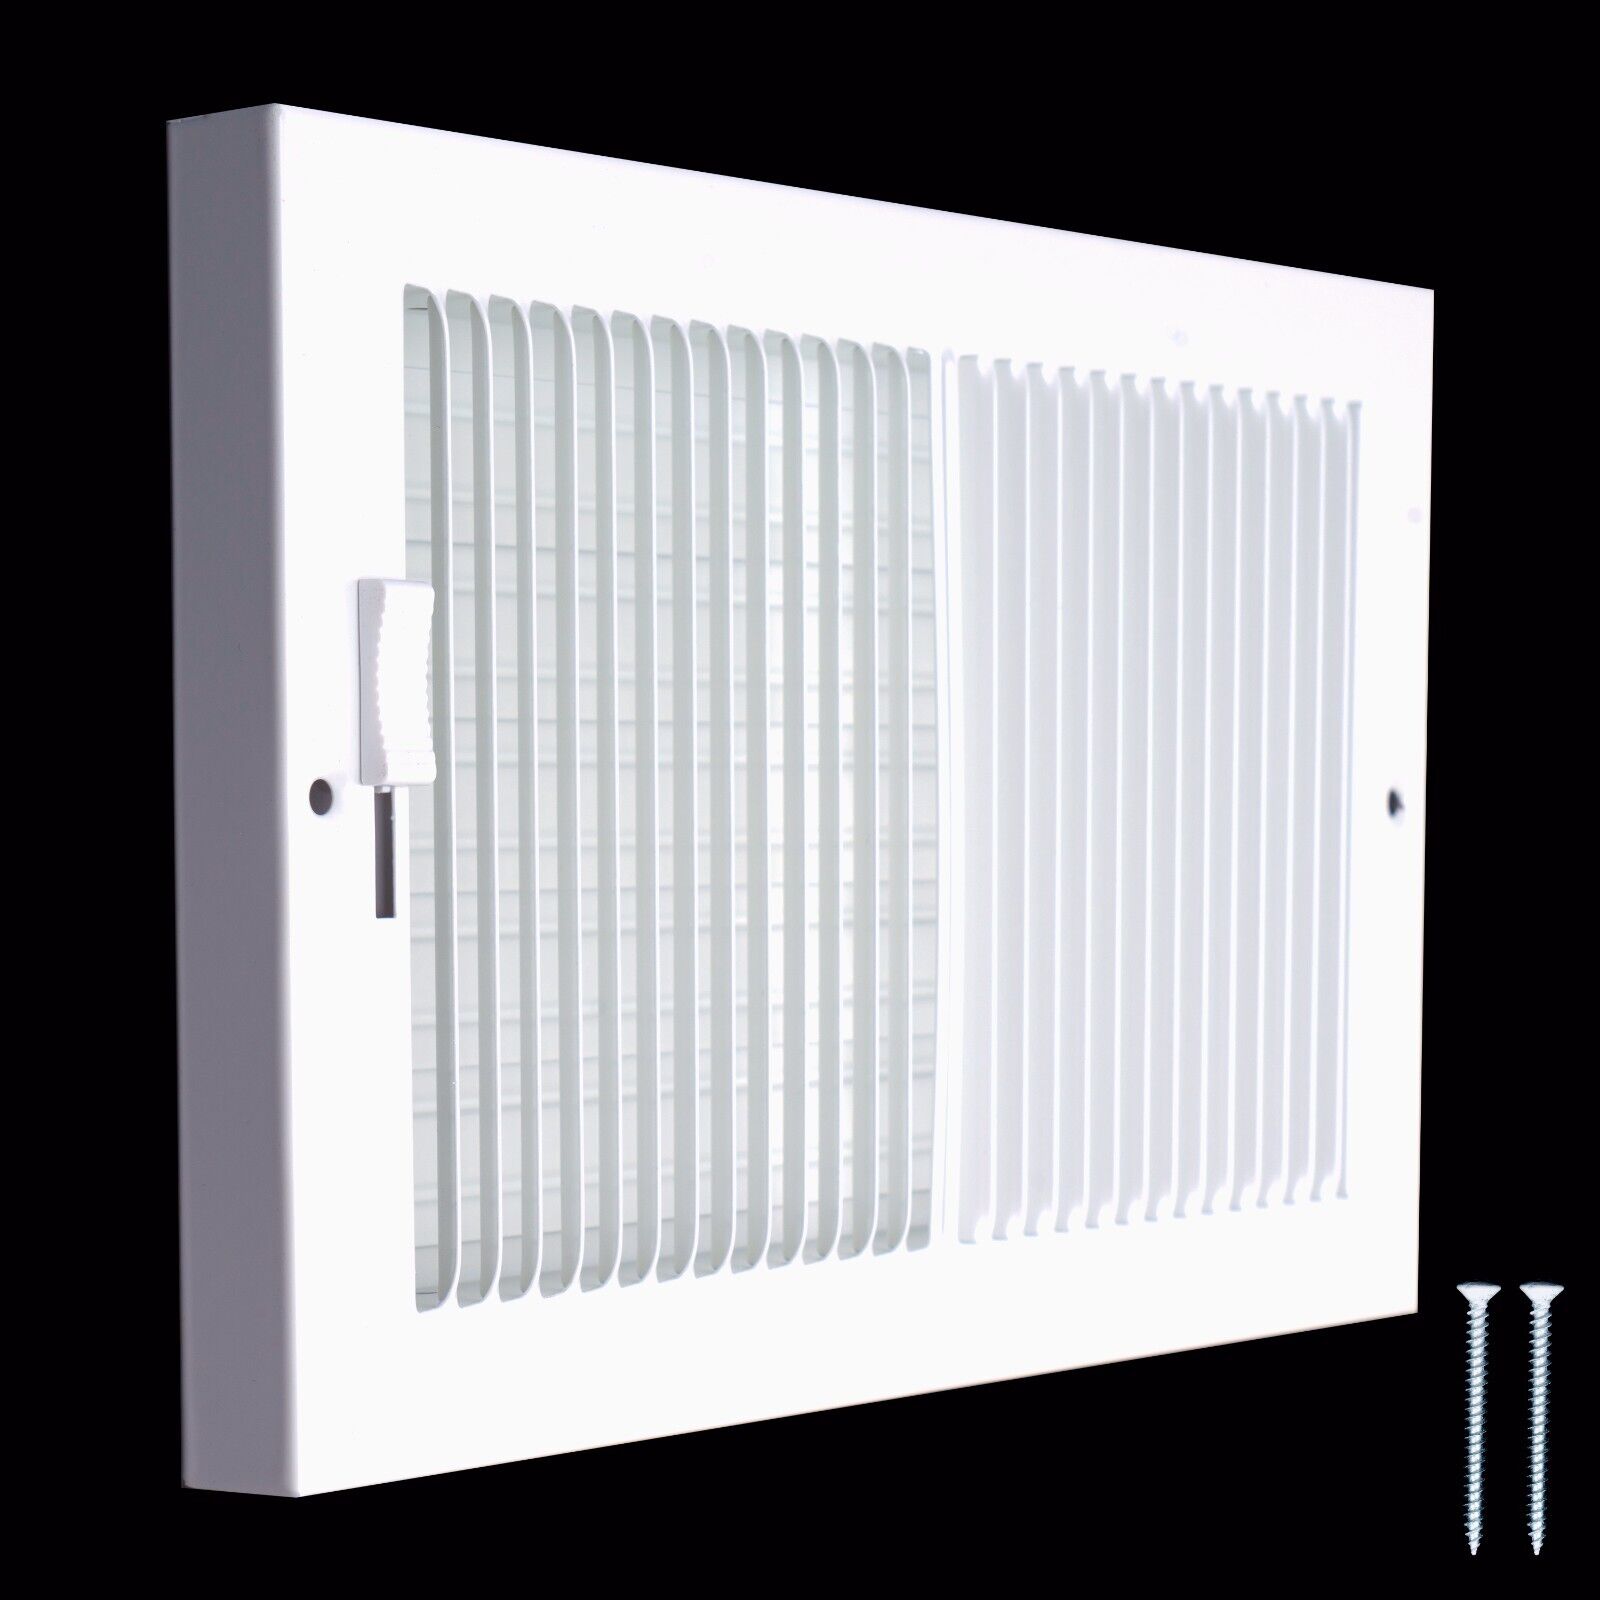 Steel Baseboard Air Supply Grille with Multi-shutter Damper | Air Register Vent